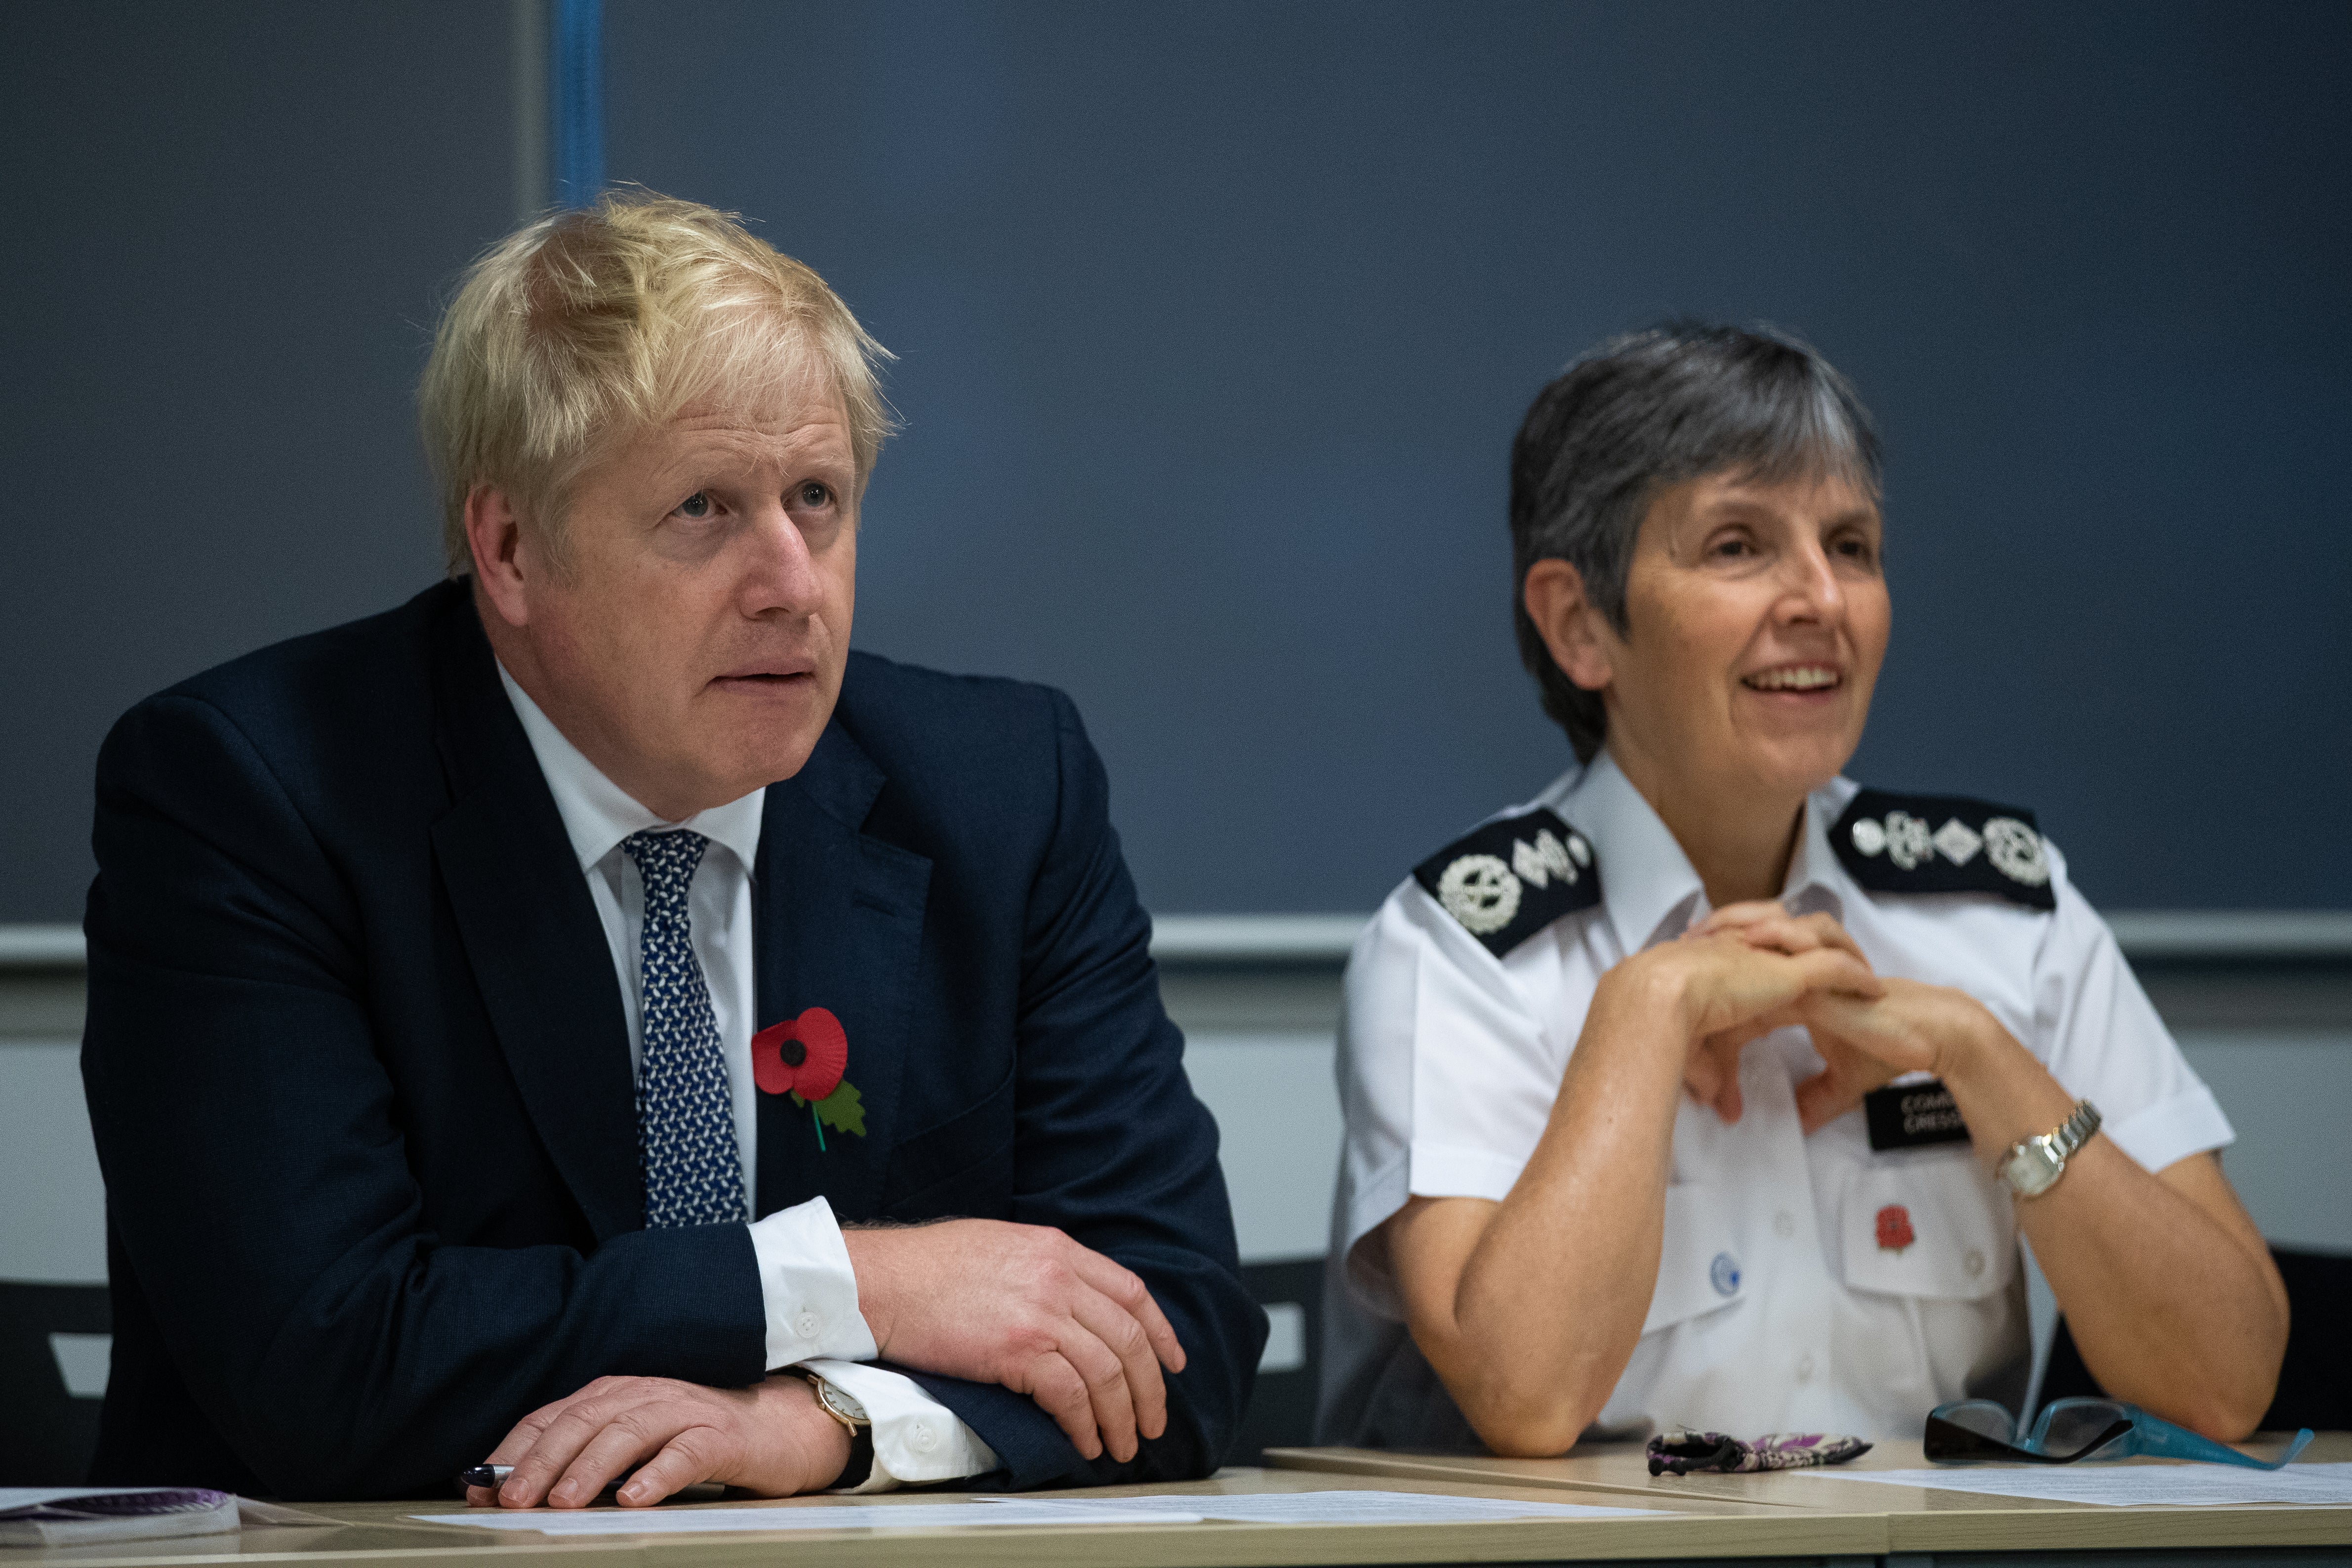 Prime Minister Boris Johnson and Police Commissioner Cressida Dick during a visit to Metropolitan Police training college in Hendon, north London